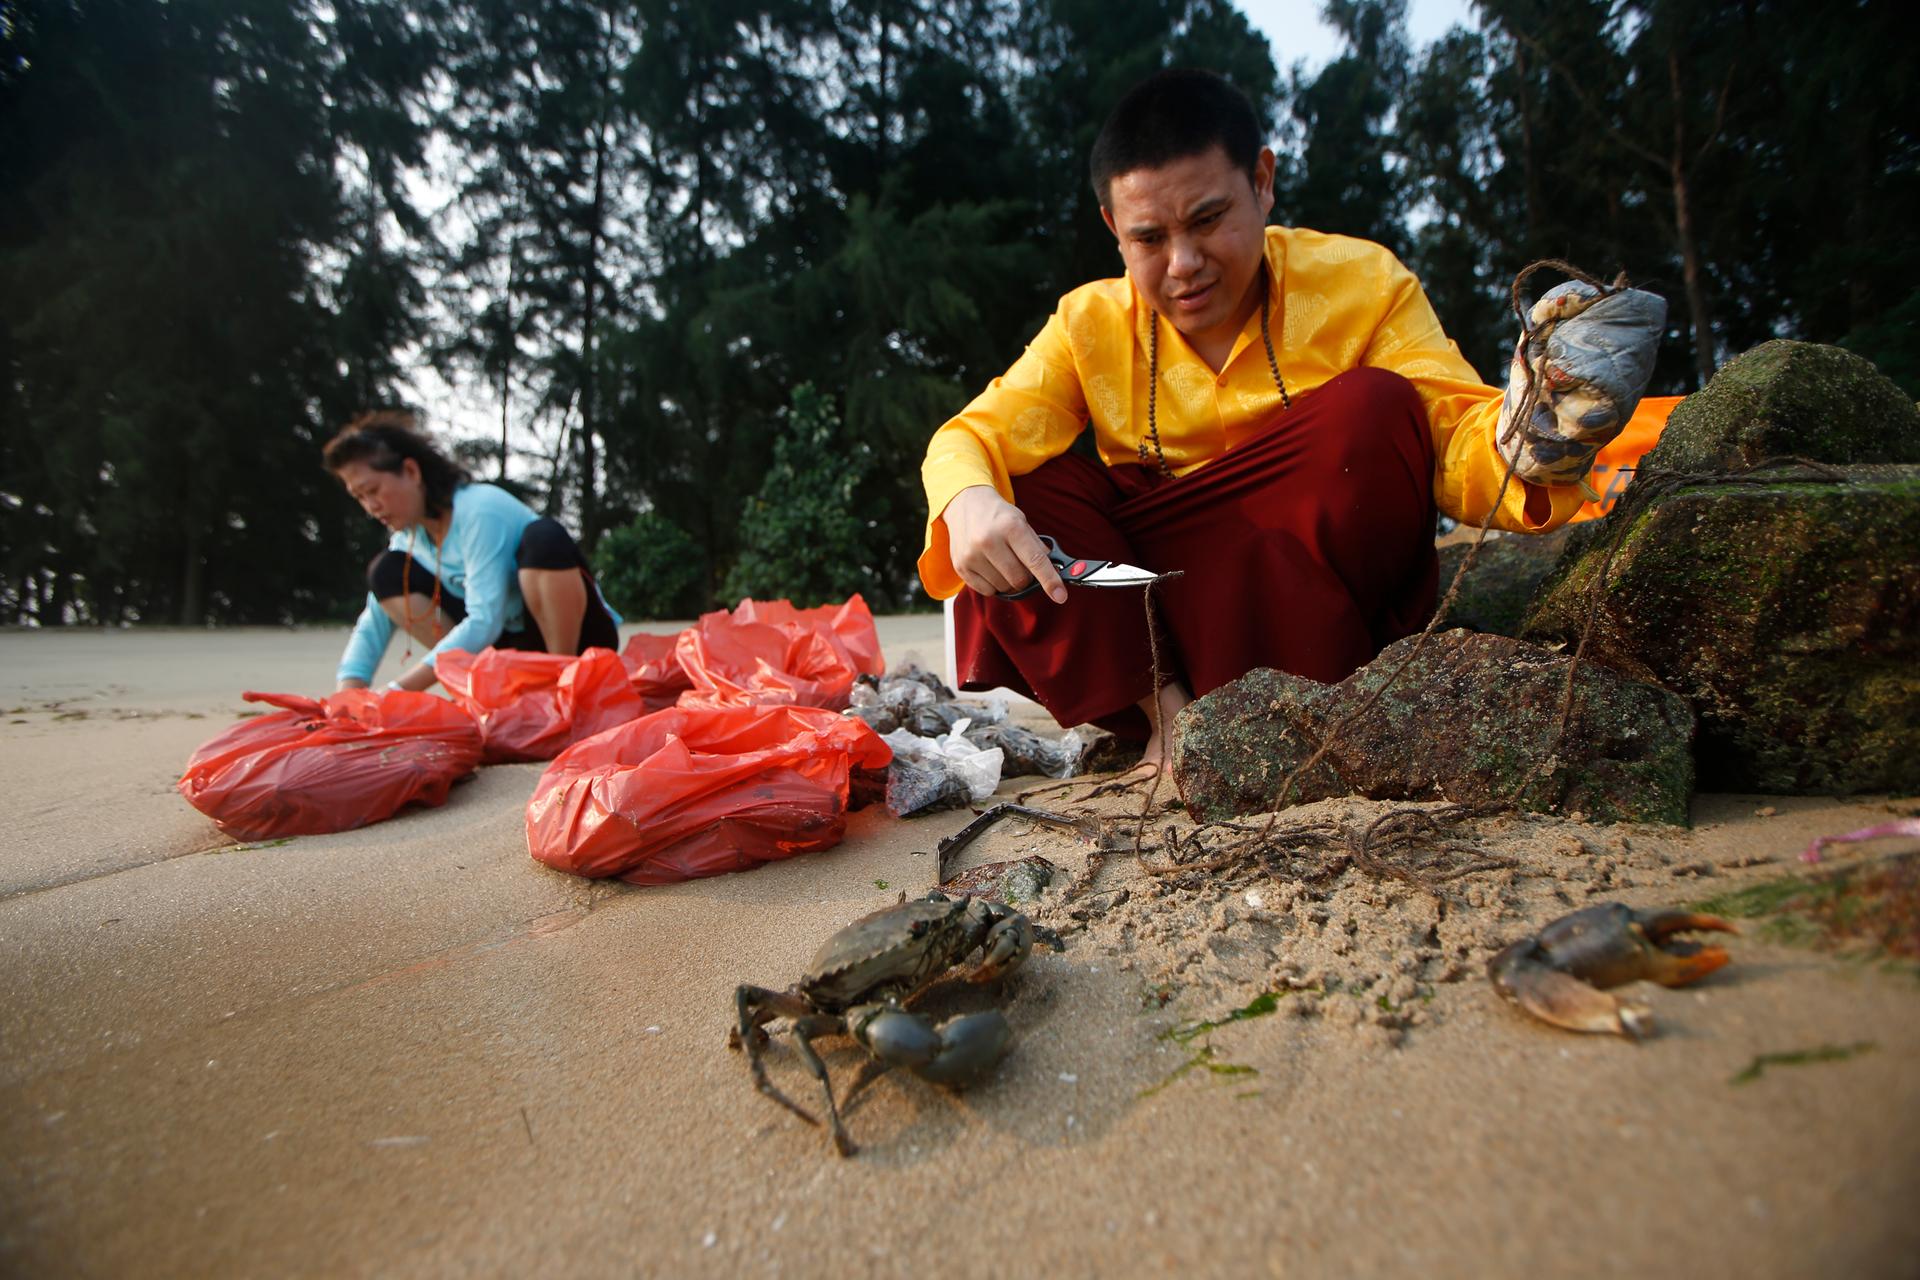 Tibetan Buddhists believe that during lunar and solar eclipses, the effects of one's good or bad deeds are multiplied several-fold. Here, a Tibetan Buddhist monk releases crabs into the sea ahead of a total lunar eclipse in Singapore on October 8, 2014. O